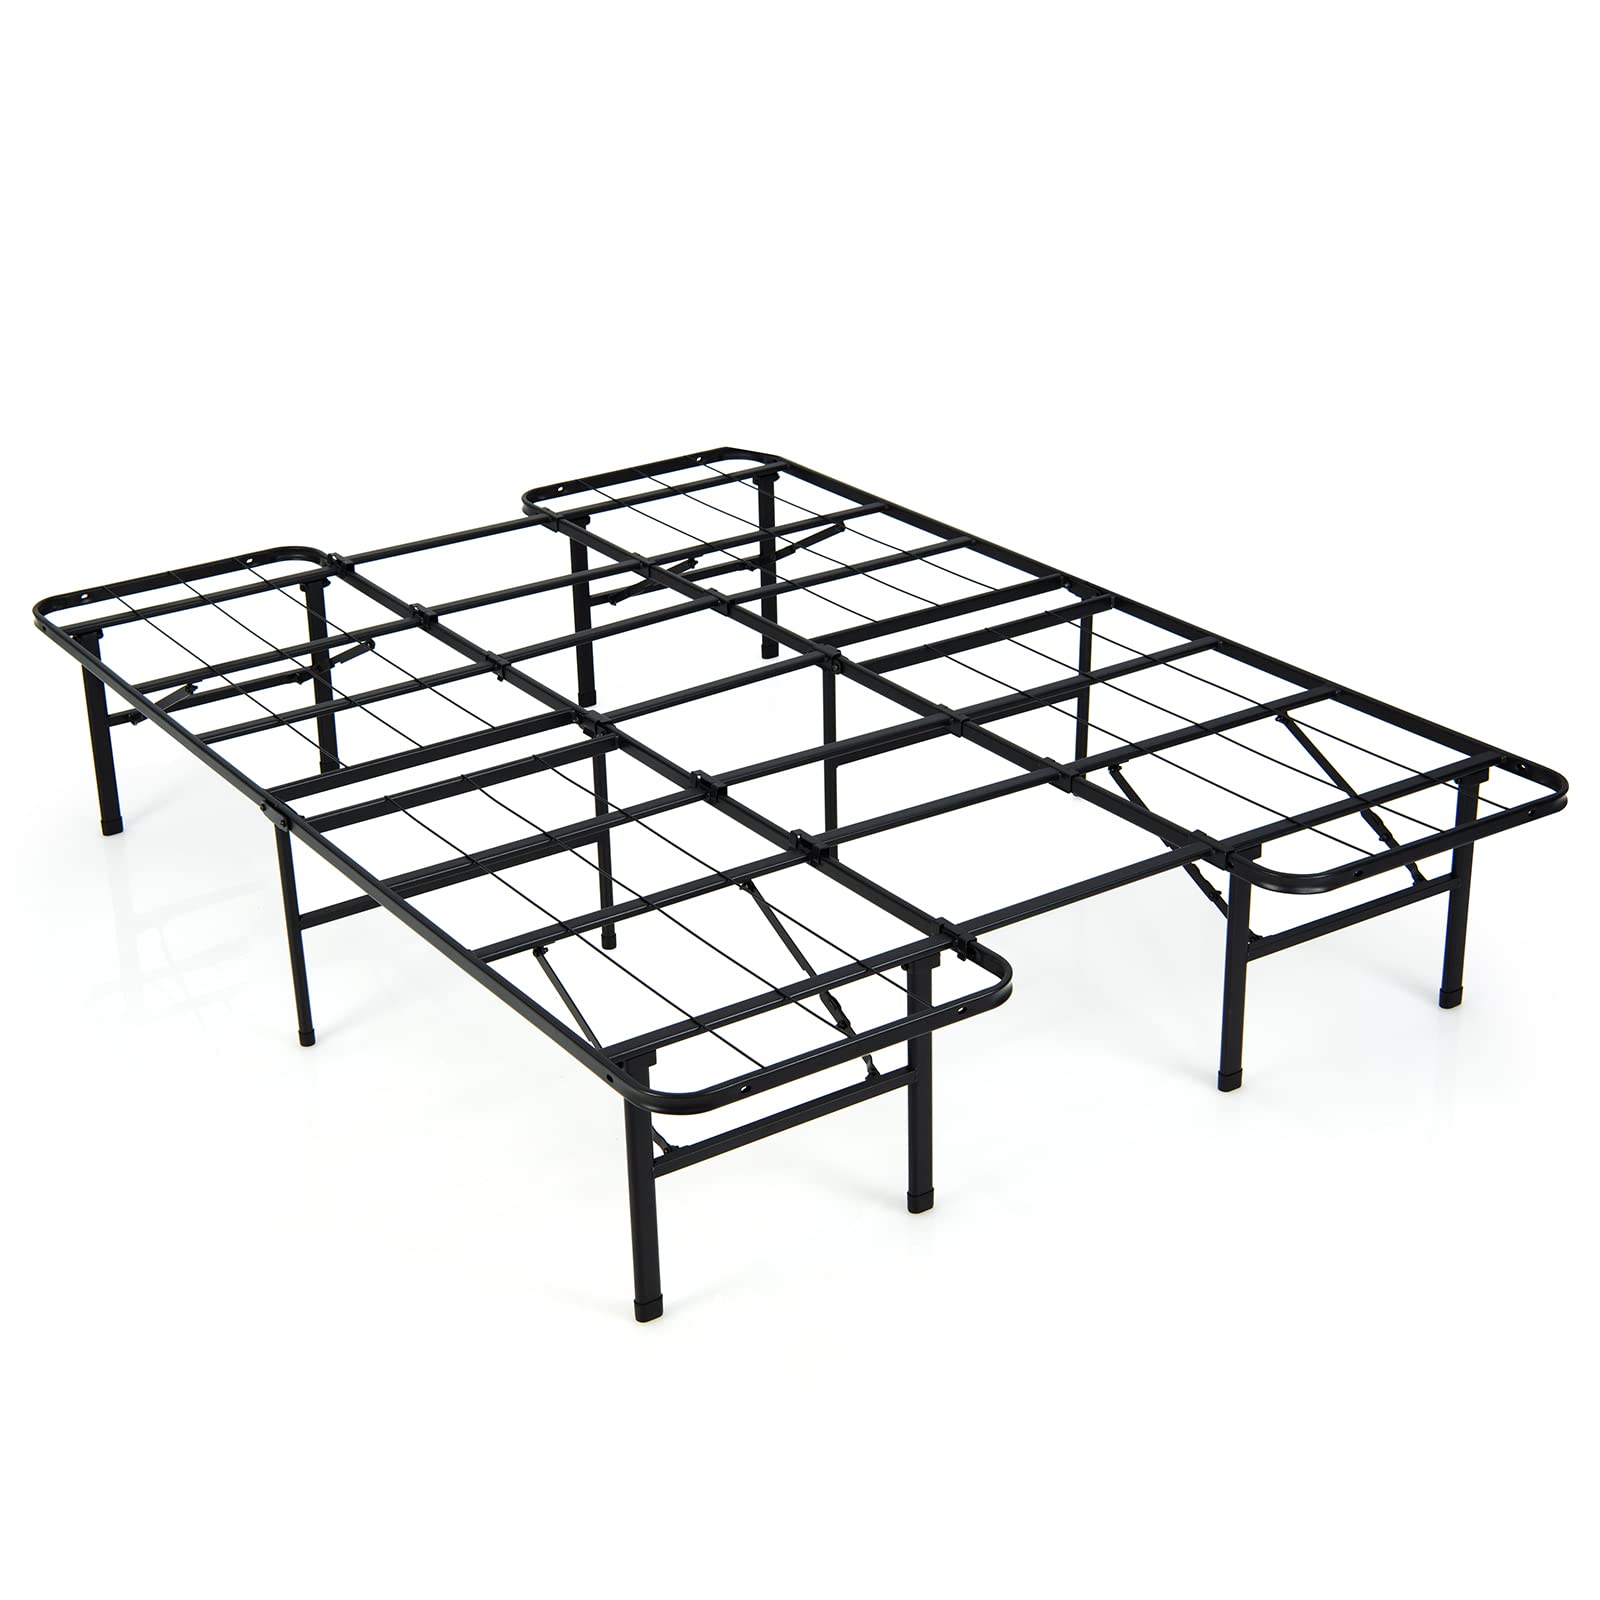 Giantex Folding Bed Frame Steel Platform Bed Twin/Full Size Portable Bed